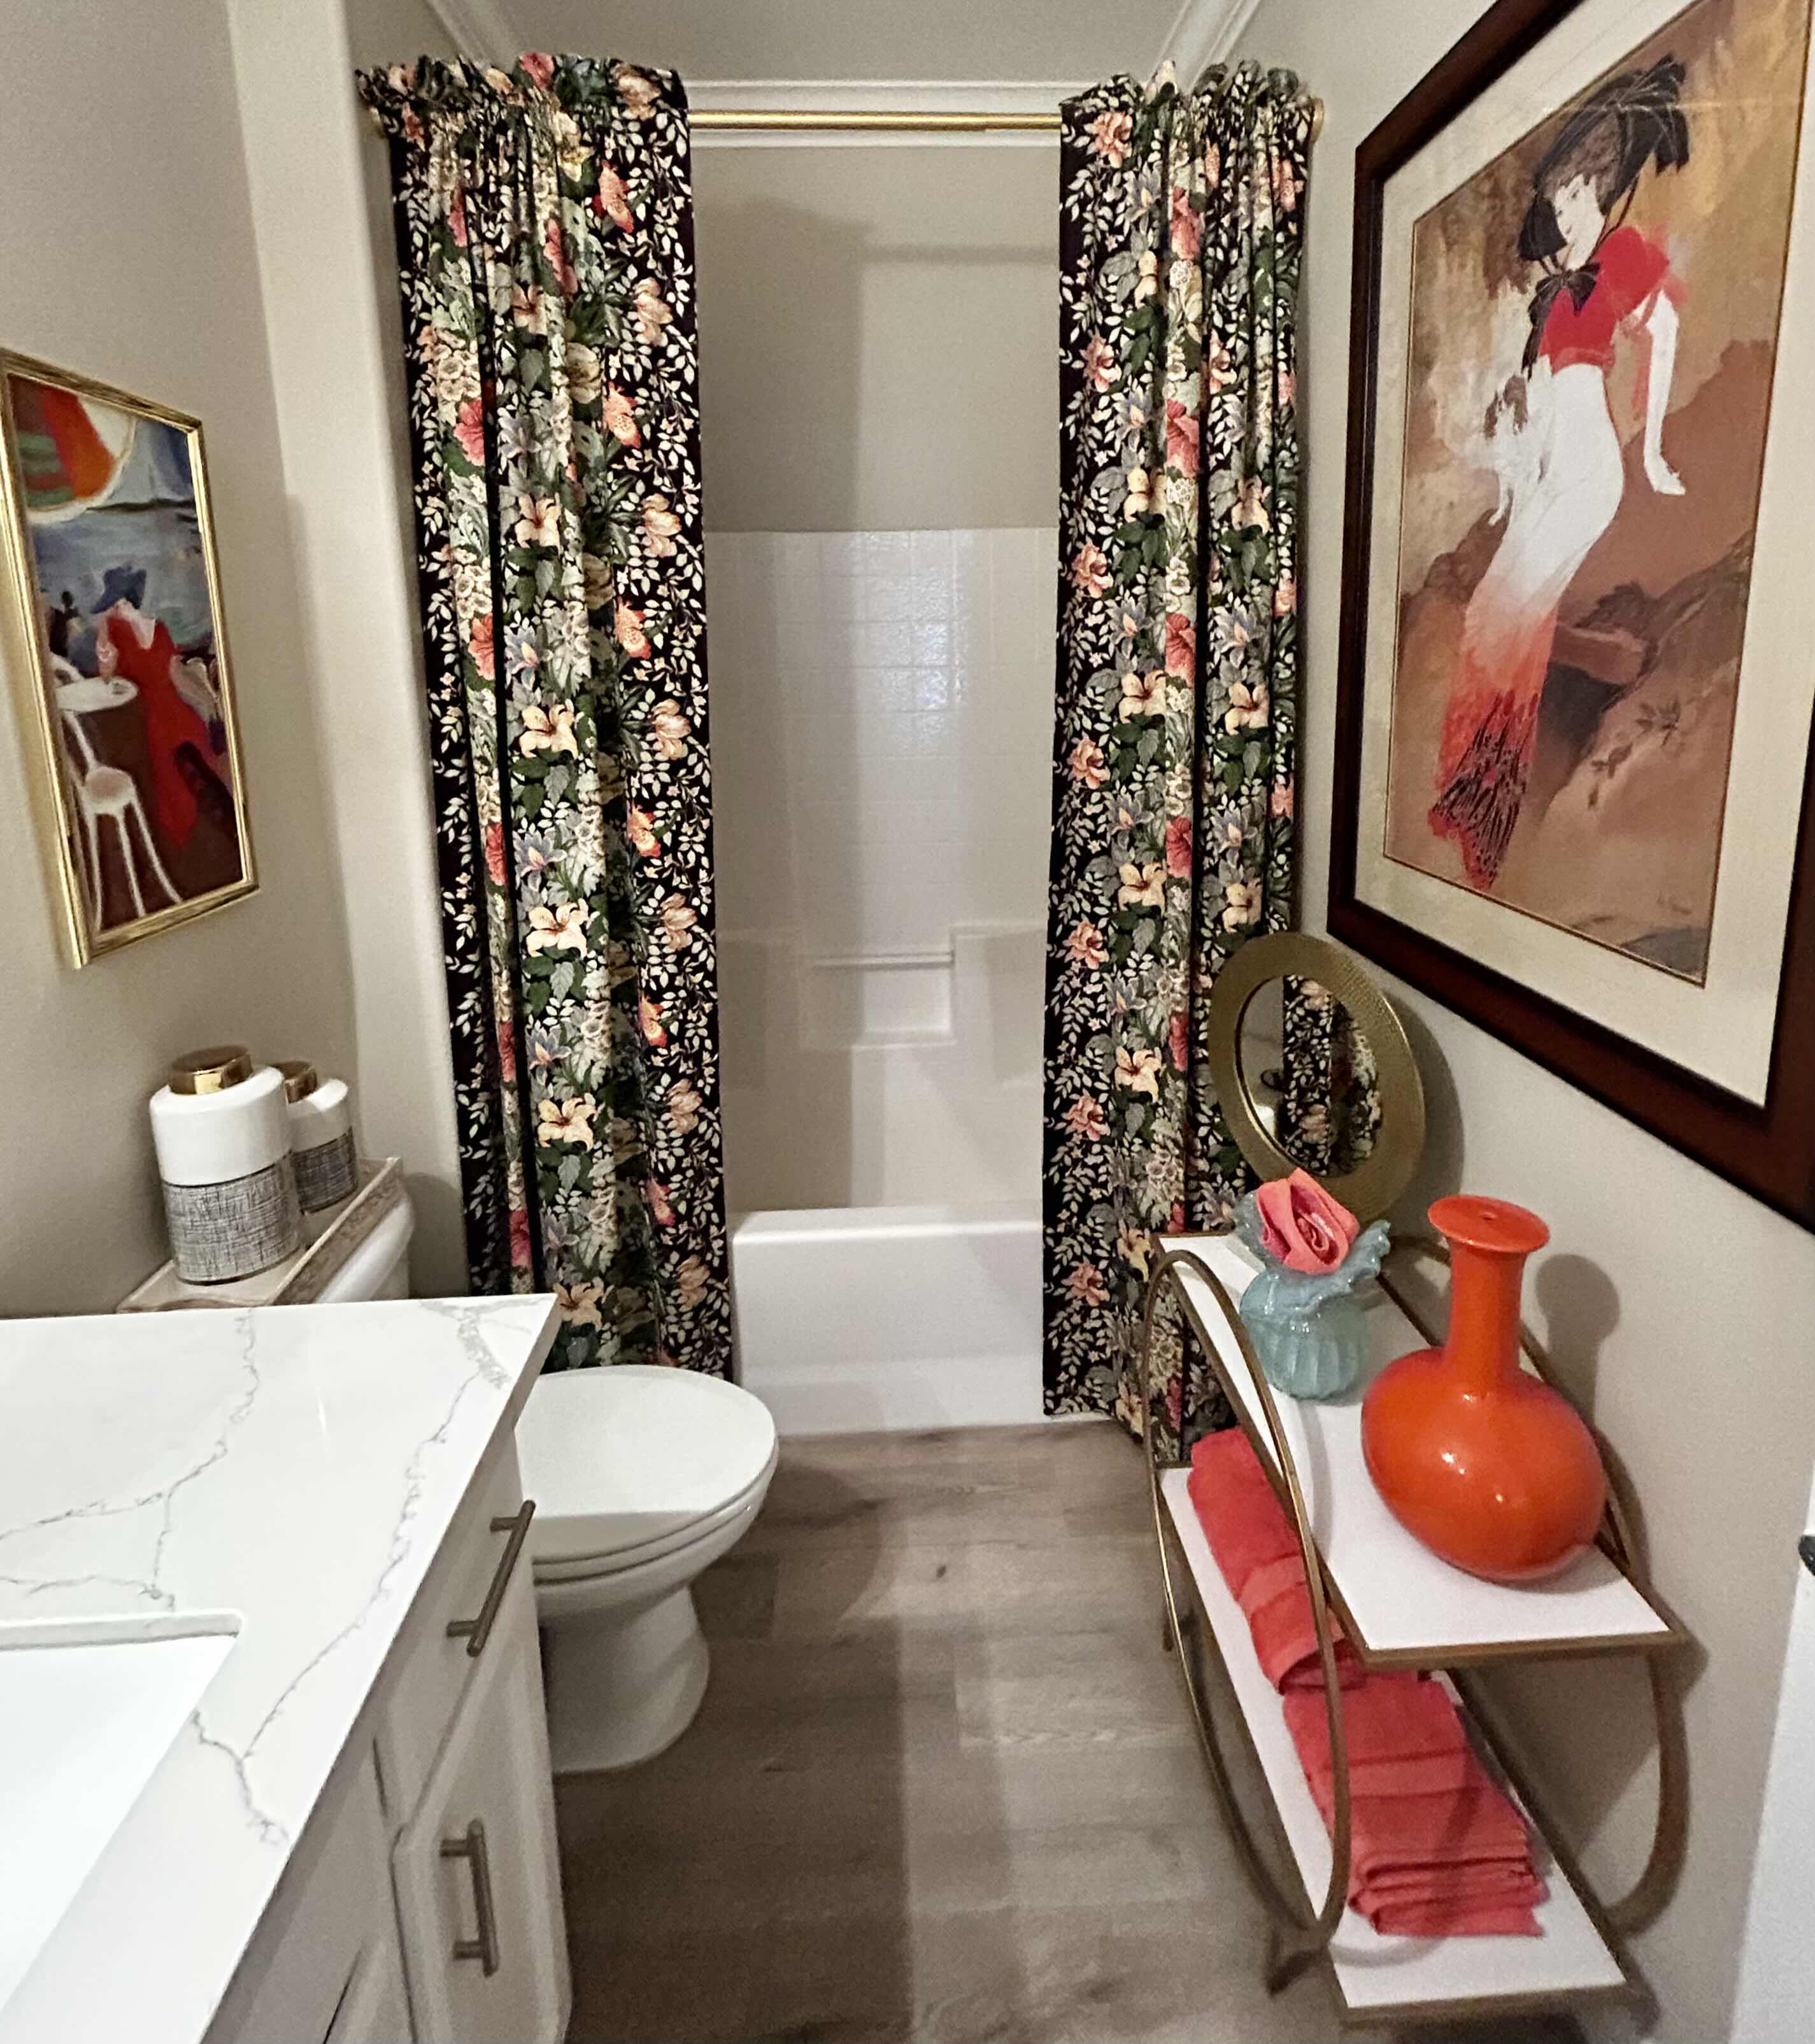 Photo 1 of BATHROOM ENSEMBLE INCLUDES- DRAPERY PANELS, 2 ARTWORK, ORANGE VASE AND GOLD HAMMERED MIRROR ON STAND, 2 BLACK AND WHITE TALL JARS WITH LIDS AND BLUE GLASS VASE (CART NOT INCLUDED) LARGEST FRAMED ARTWORK 3’ x 46”